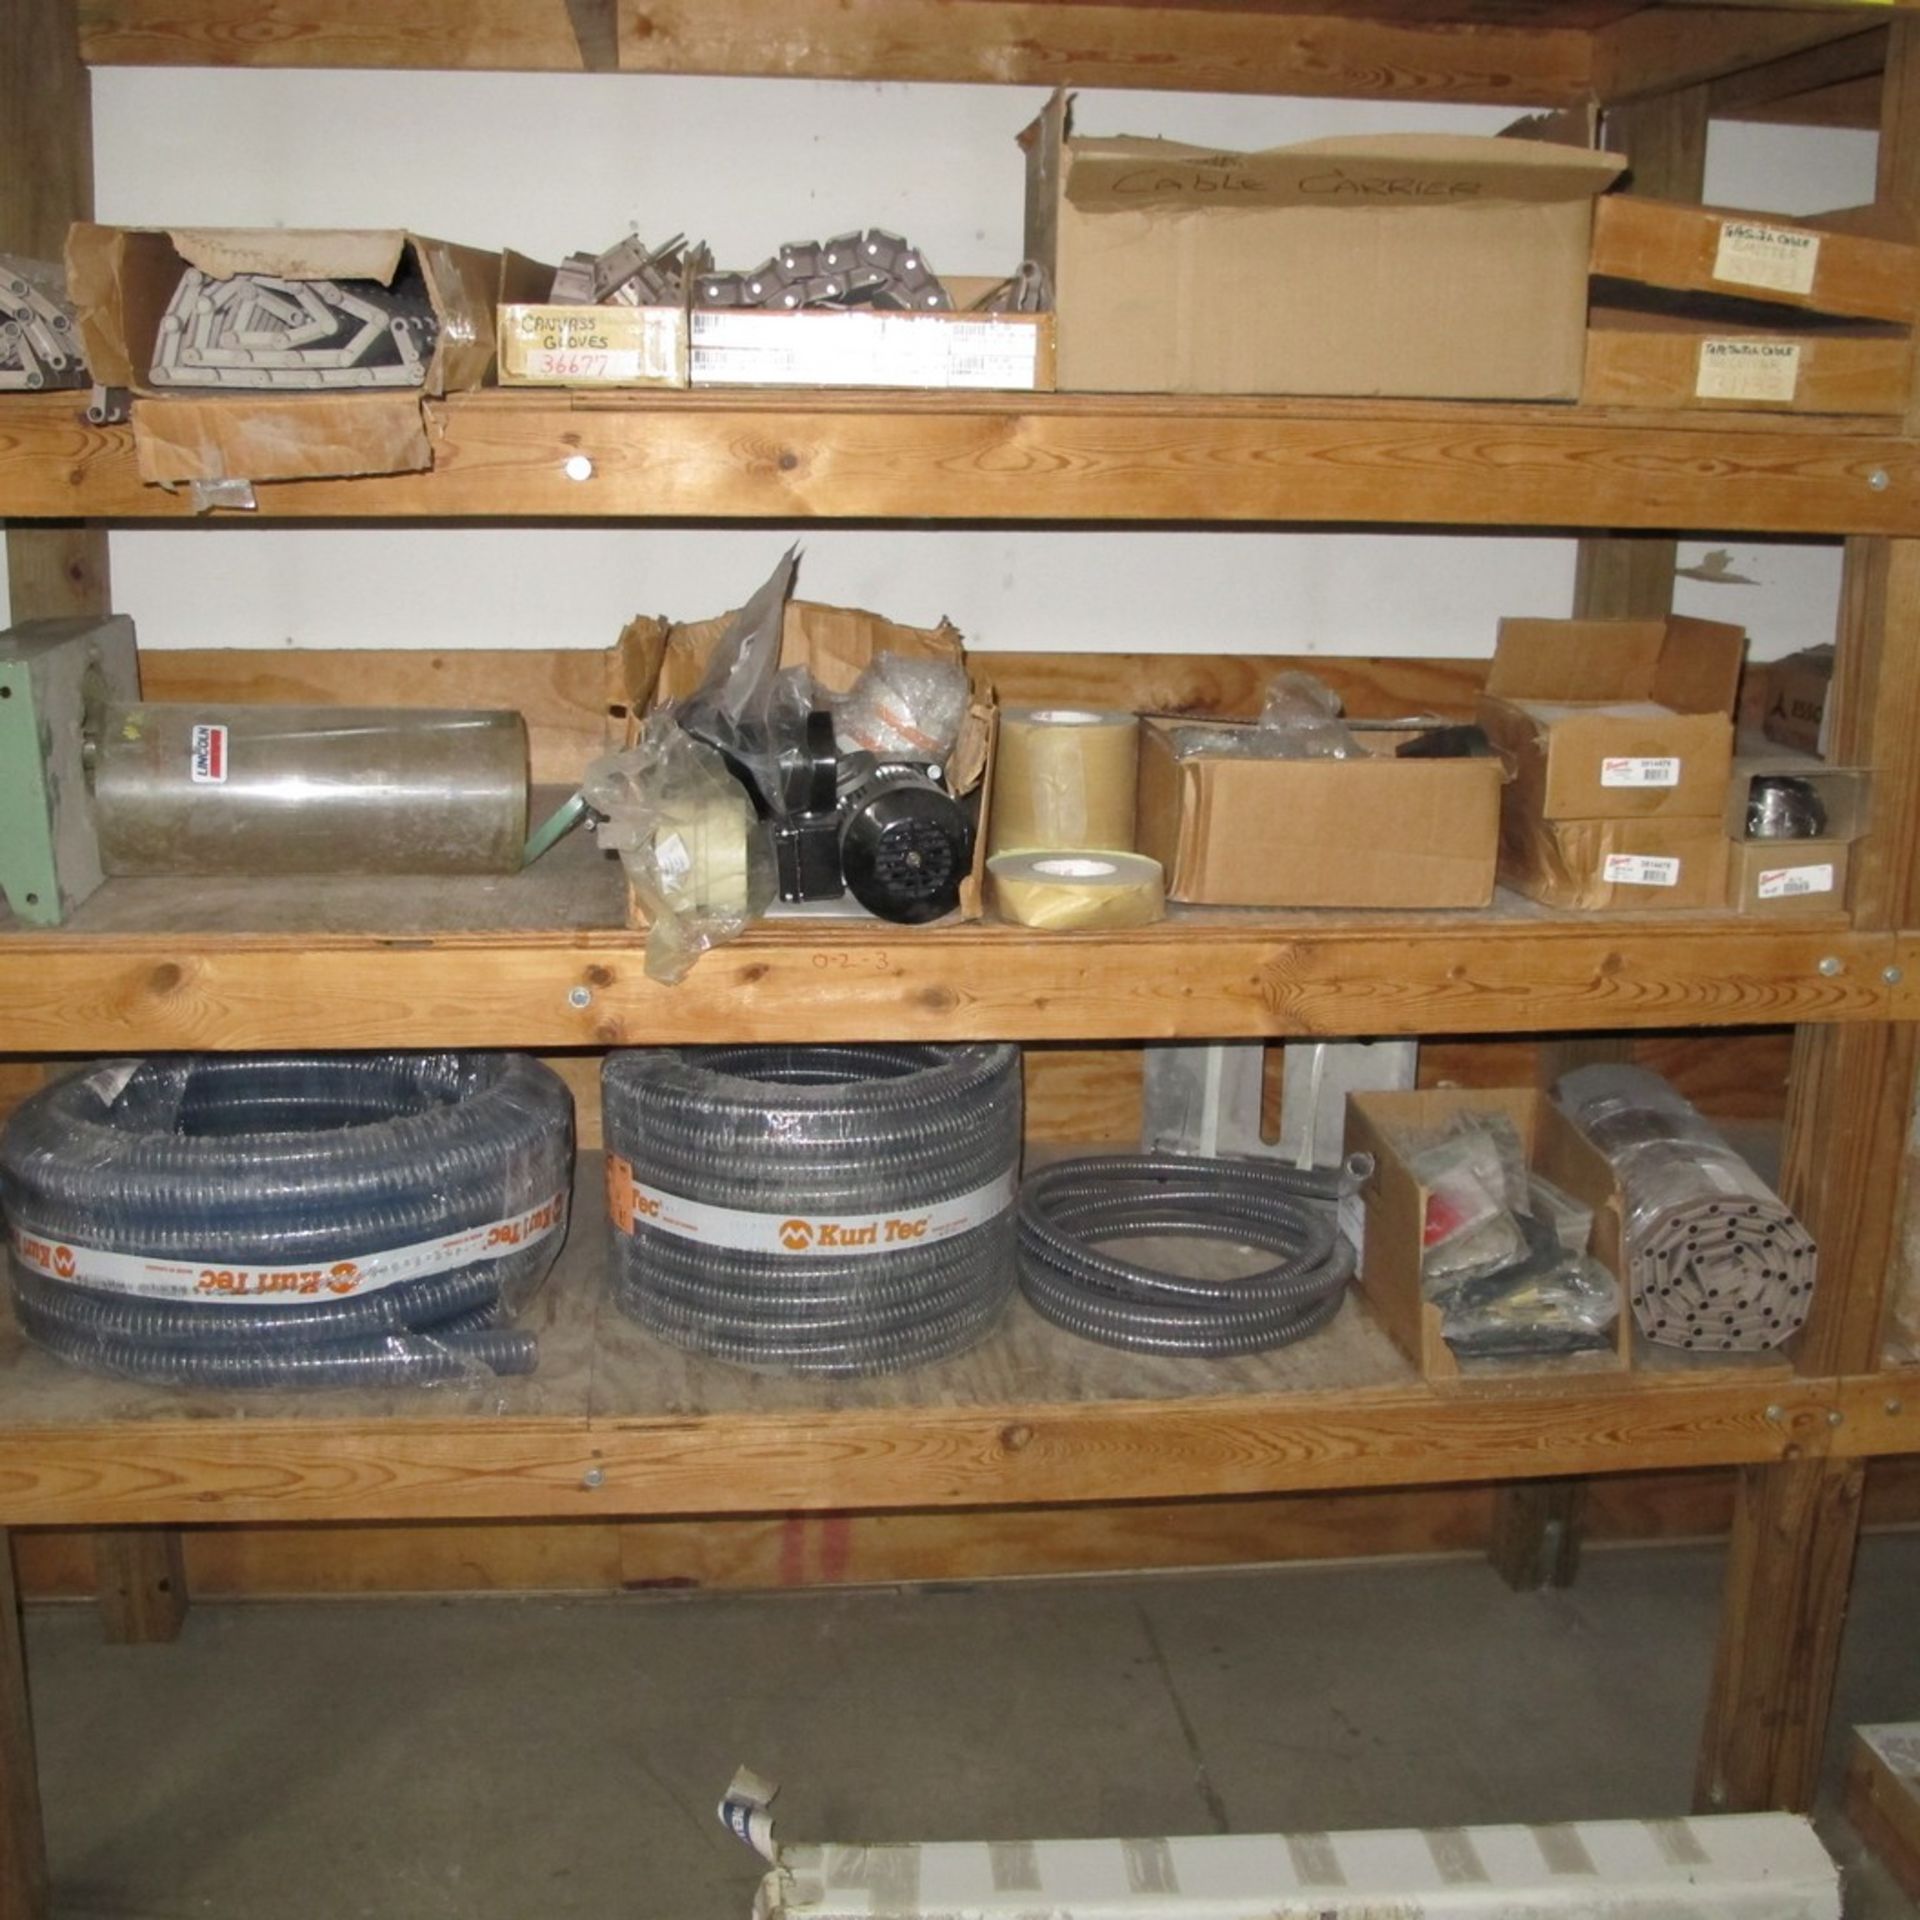 LOT OF (4) SECTION WOODEN RACK, 5-LEVELS TALL W/ ASST. METAL ROLLERS, HOSES, BELTS, CABLES, MOTOR, - Image 3 of 5